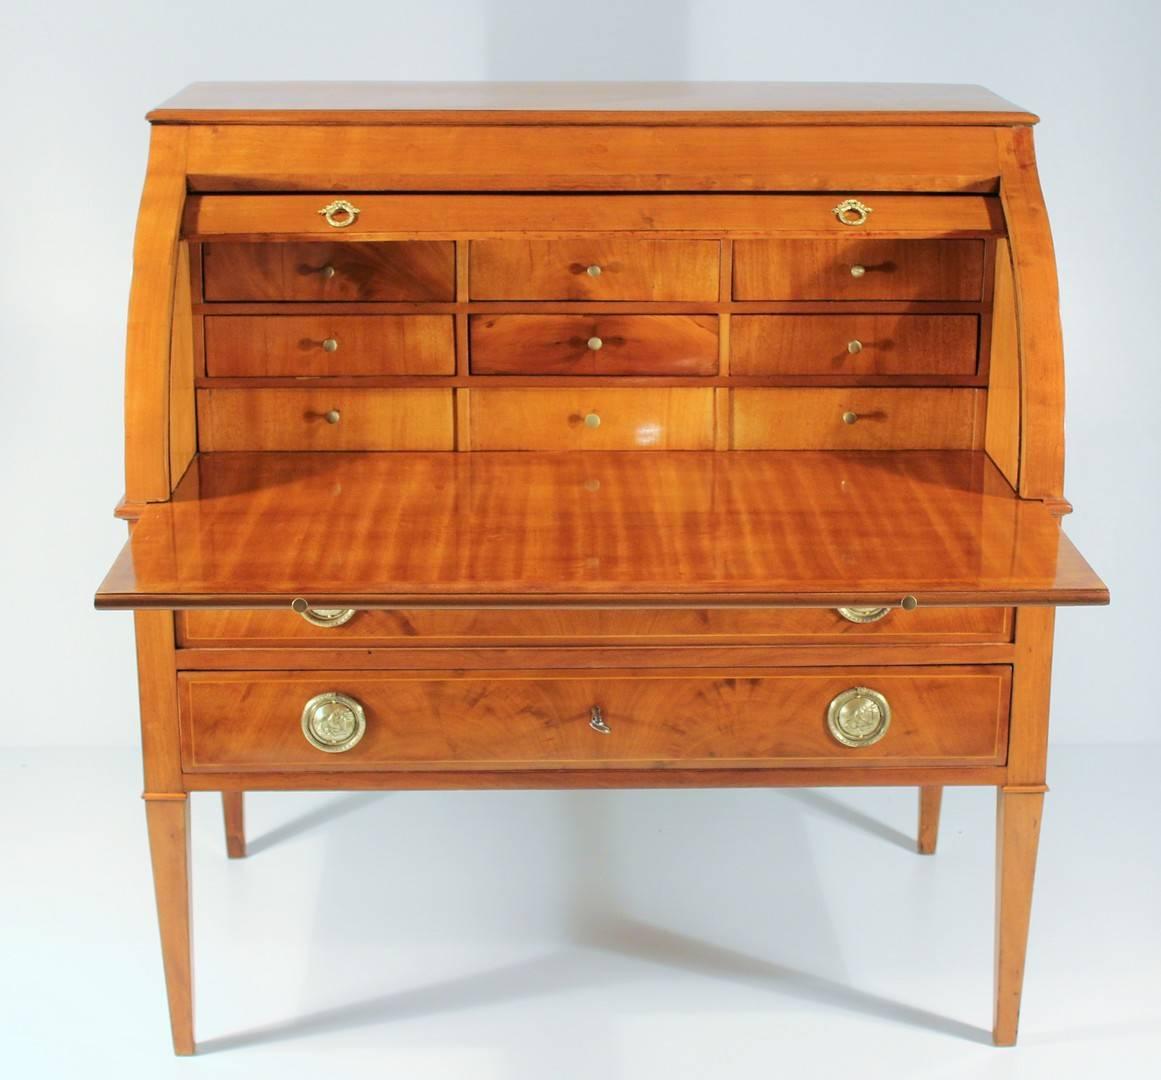 Rolltop writing desk with nine interior drawers, the exterior with two drawers, raised on cabriole legs. Bleeched mahogany veneer. The secretaire is in excellent condition. It will be shipped from Germany. Shipping costs to Boston are included.